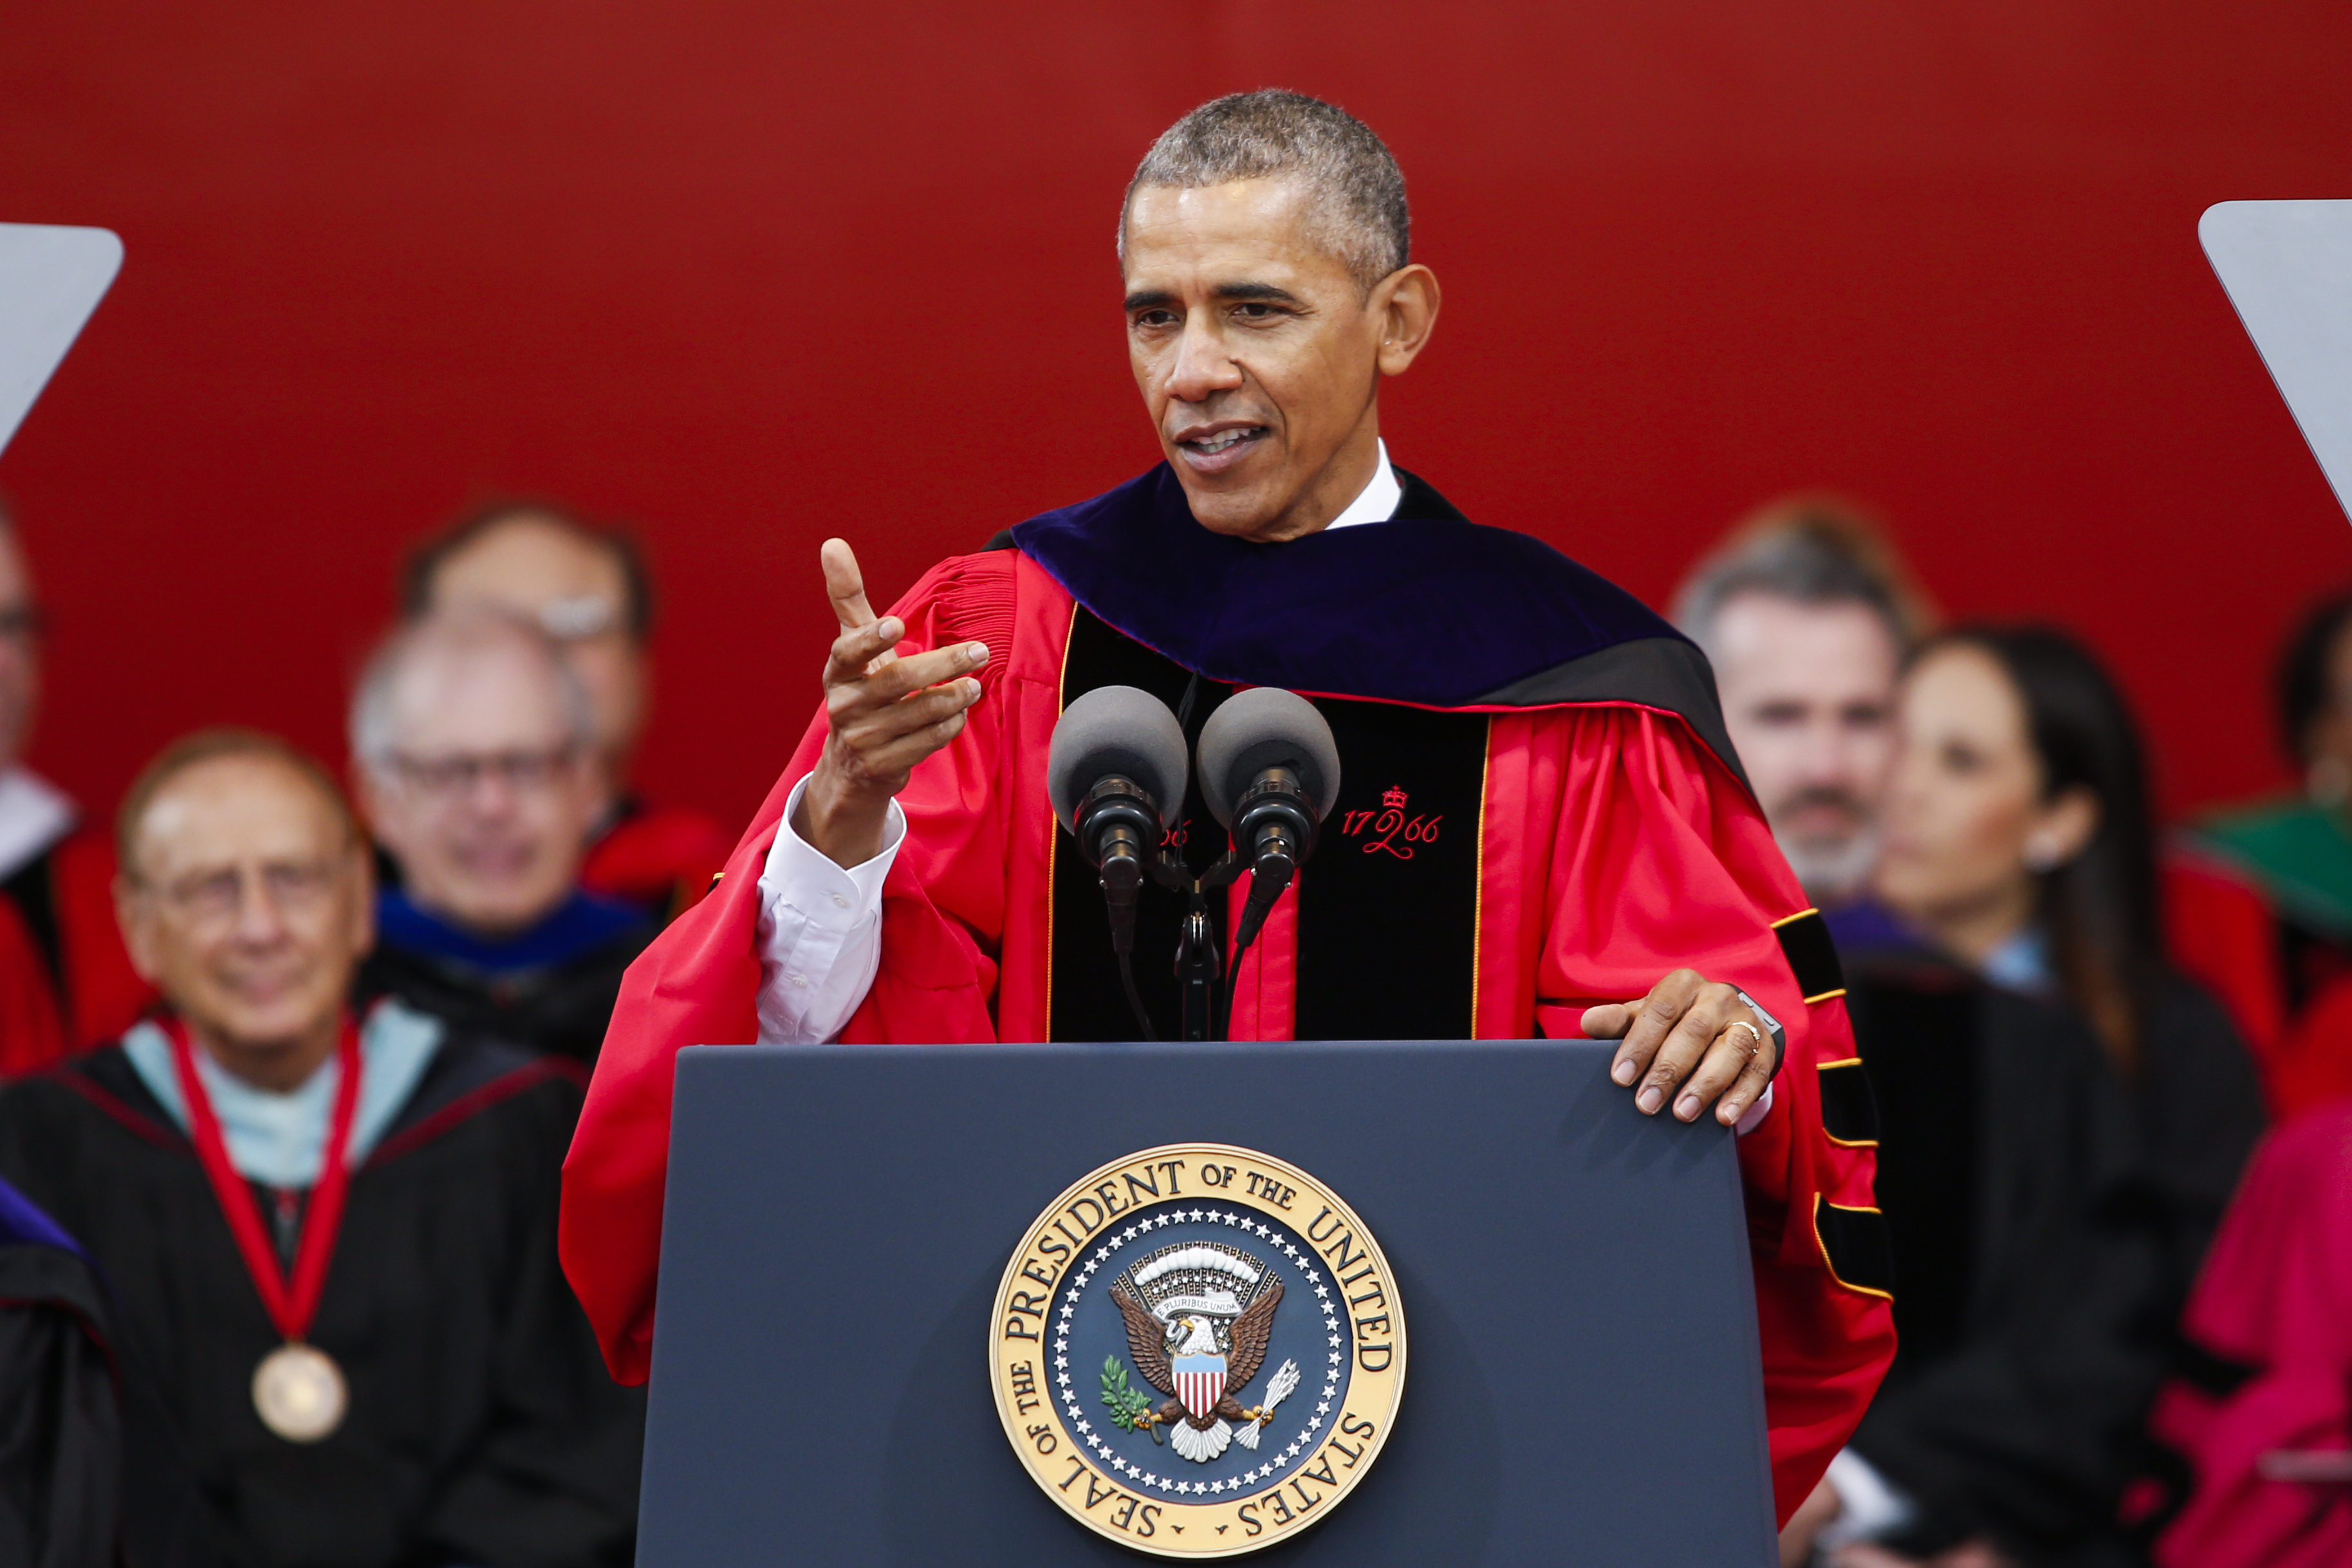 President Barack Obama speaks after receiving an honorary doctorate of laws during the 250th anniversary commencement ceremony at Rutgers University on May 15, 2016 in New Brunswick, New Jersey. (Eduardo Munoz Alvarez/Getty Images)